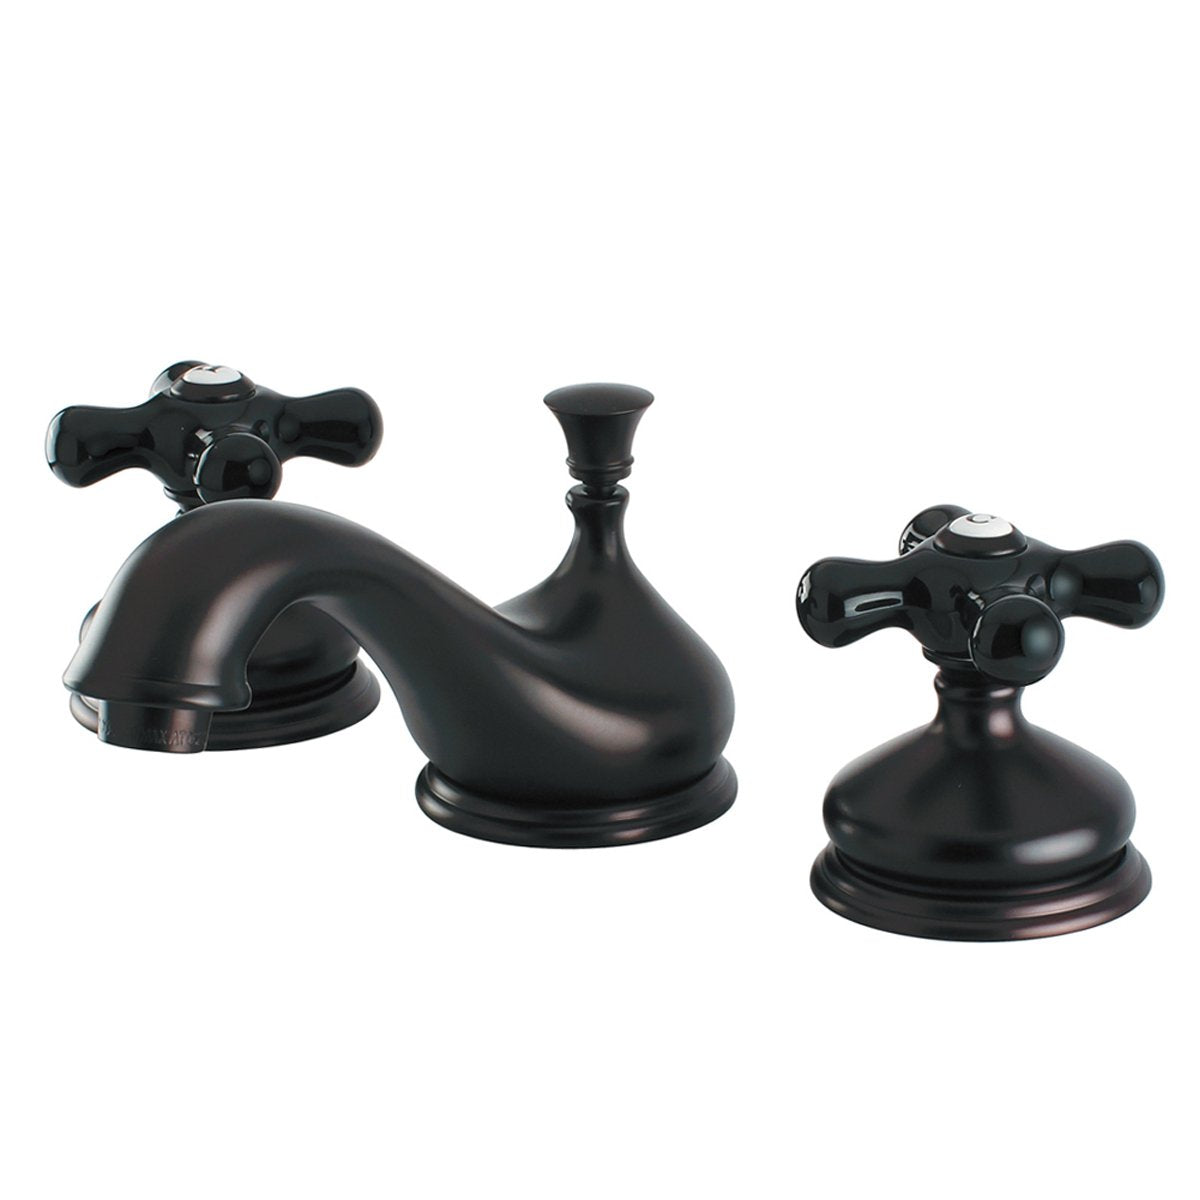 Kingston Brass Heritage Onyx Widespread Lavatory Faucet with Black  Porcelain Cross Handle, Oil Rubbed Bronze 並行輸入品 浴室、浴槽、洗面所